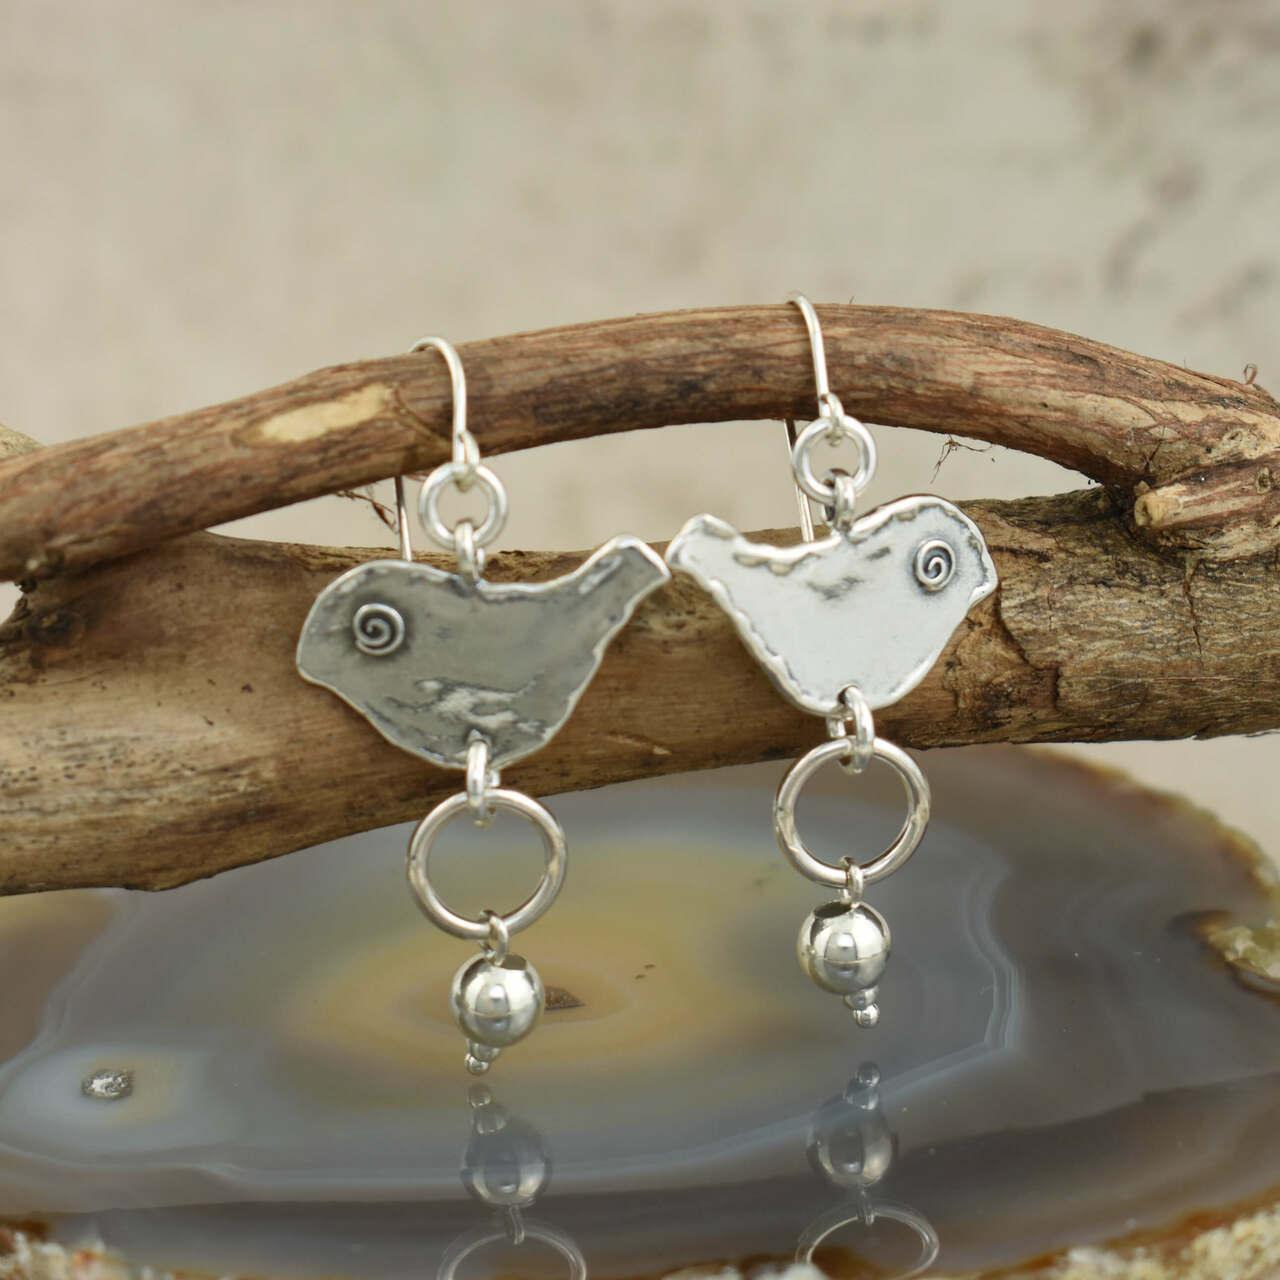 Handcrafted sterling silver bird earrings with easy on French wires